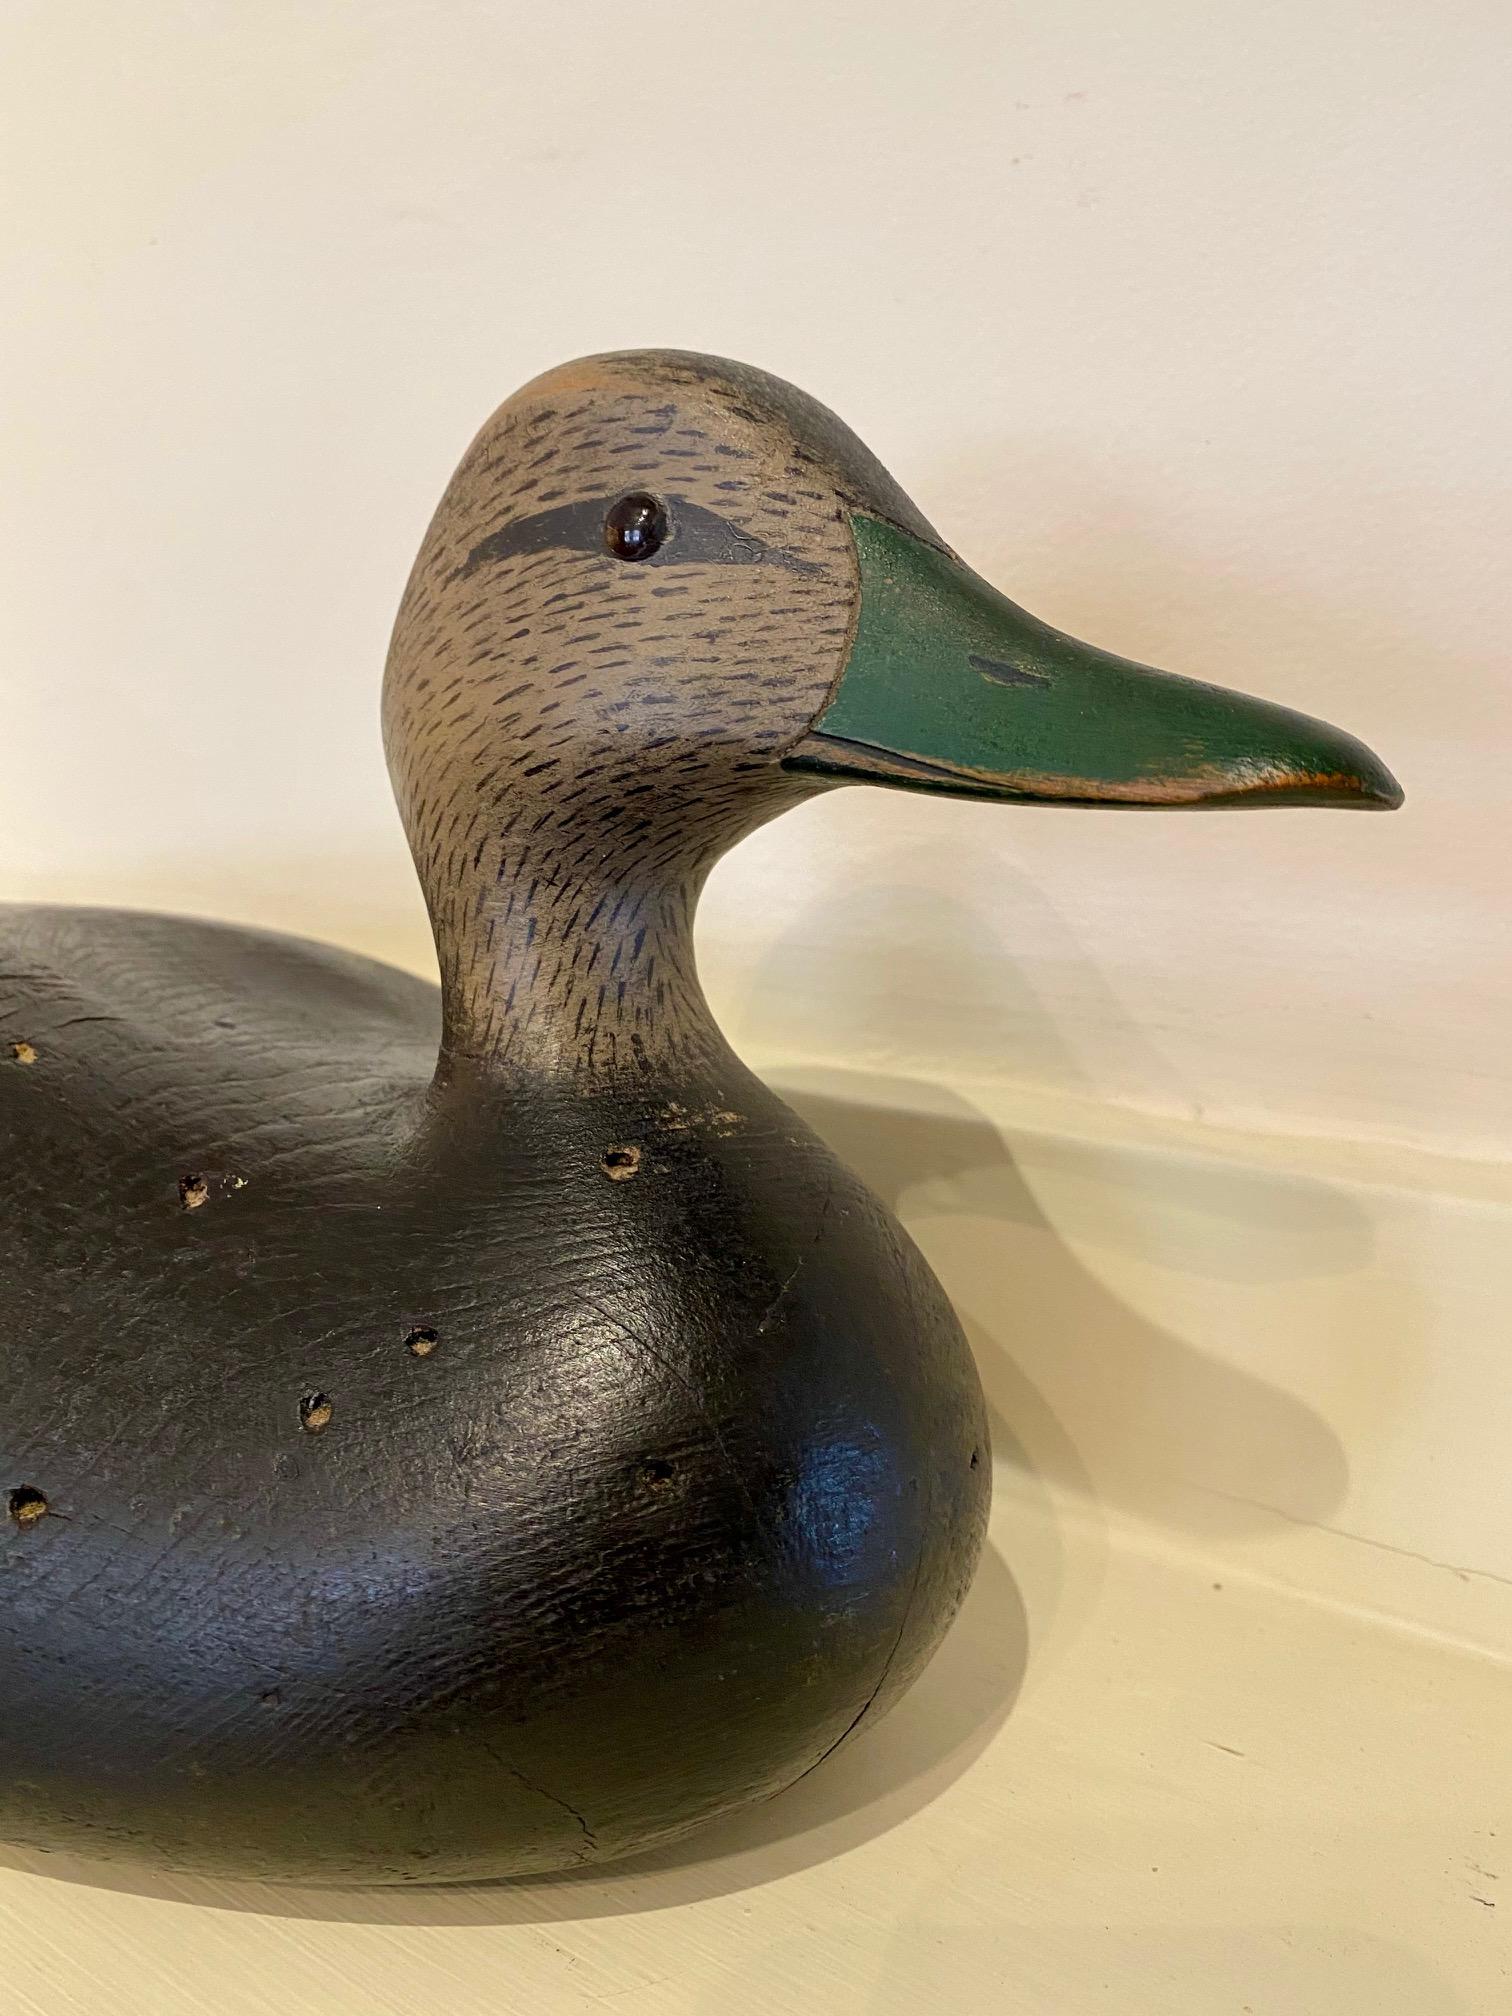 Joseph Lincoln black duck drake decoy, (Hingham, MA: 1859-1938), circa 1900, having a sleekly carved head with glass eyes, carved nares and mandible, on solid cedar body. Lincoln's simple yet accurate original painted surface remains strong with